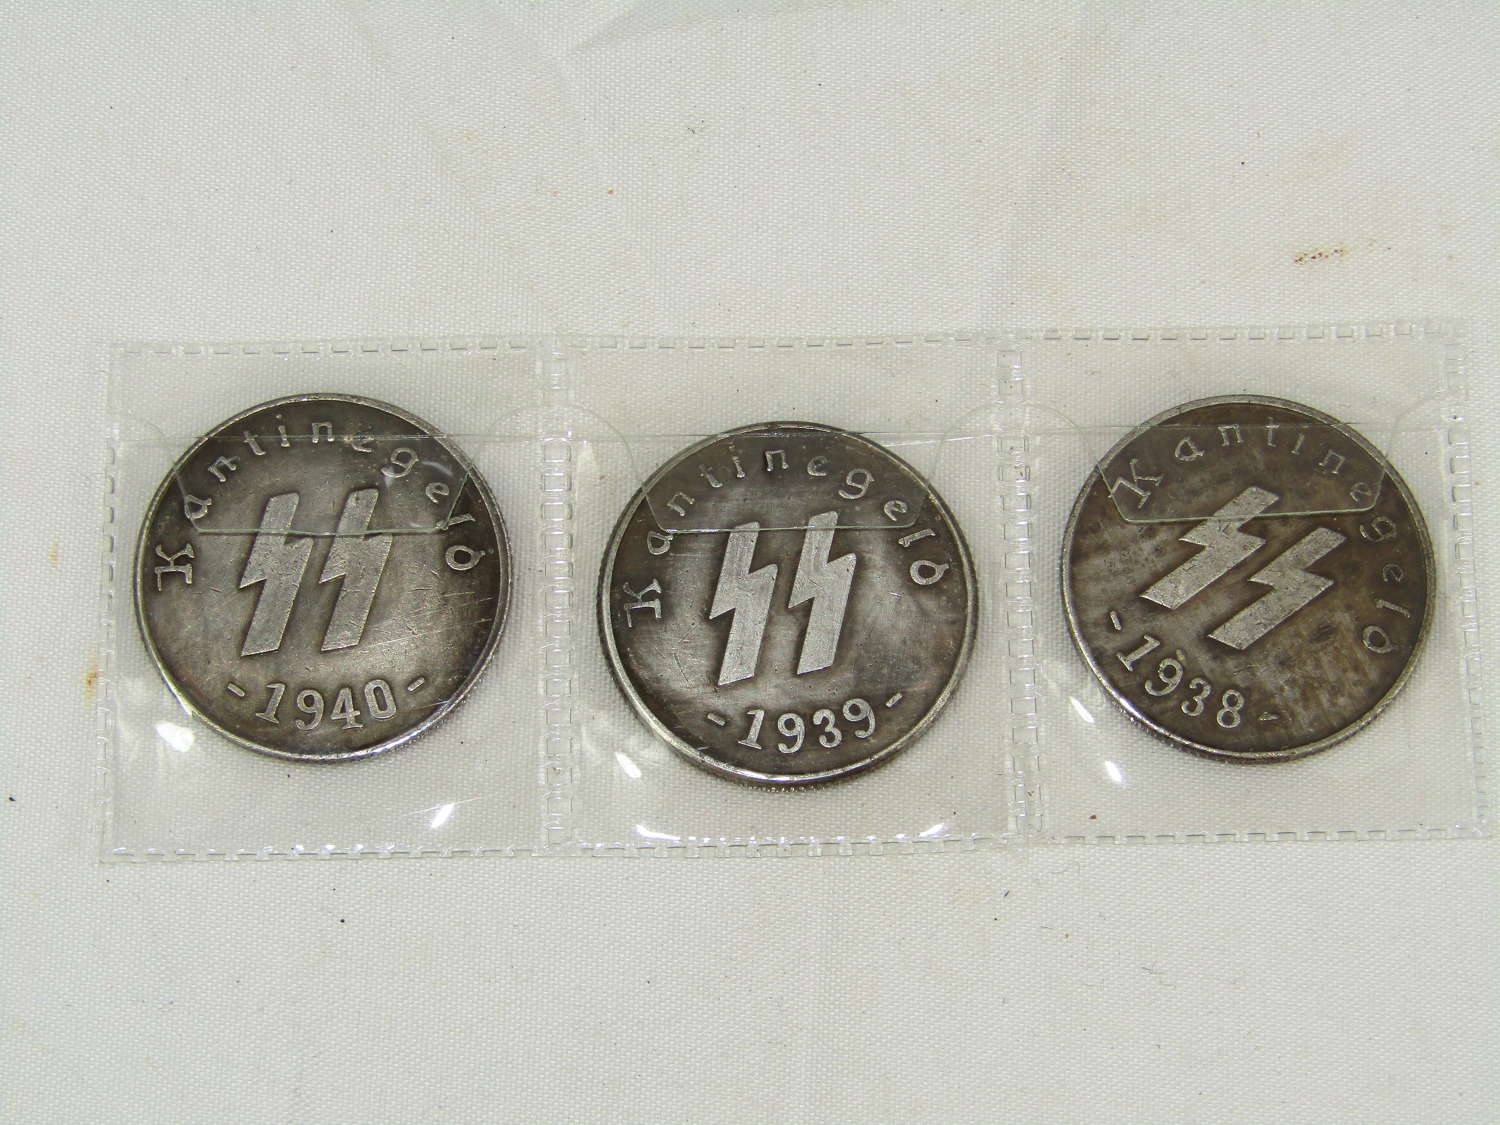 WW2 German SS Nazi Concentration Camp Coins